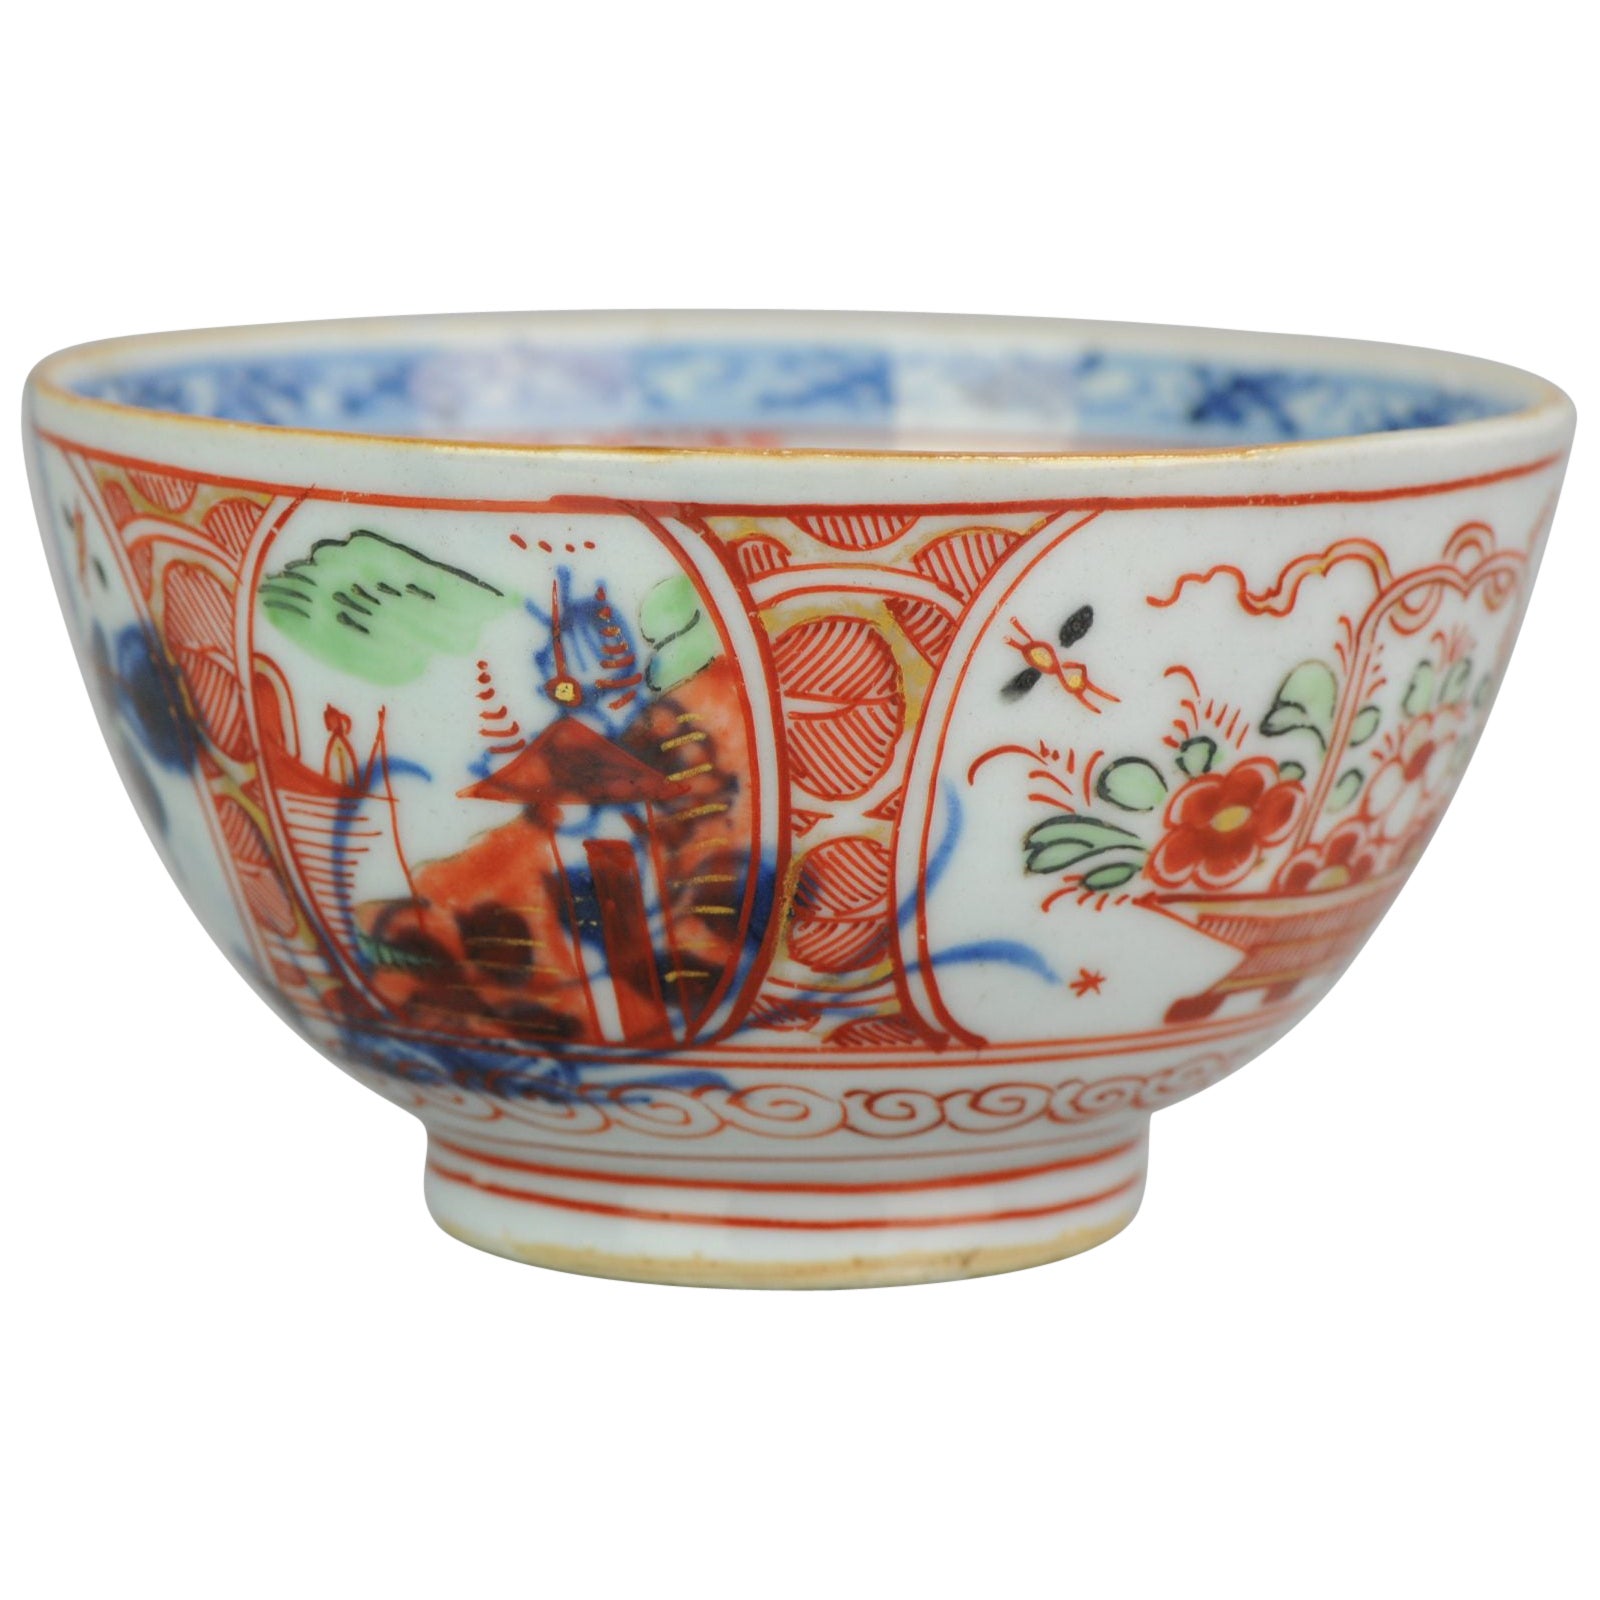 Antique Imari Qing Dynasty Chinese Porcelain Amsterdams Bont Bowl, 18th Century For Sale